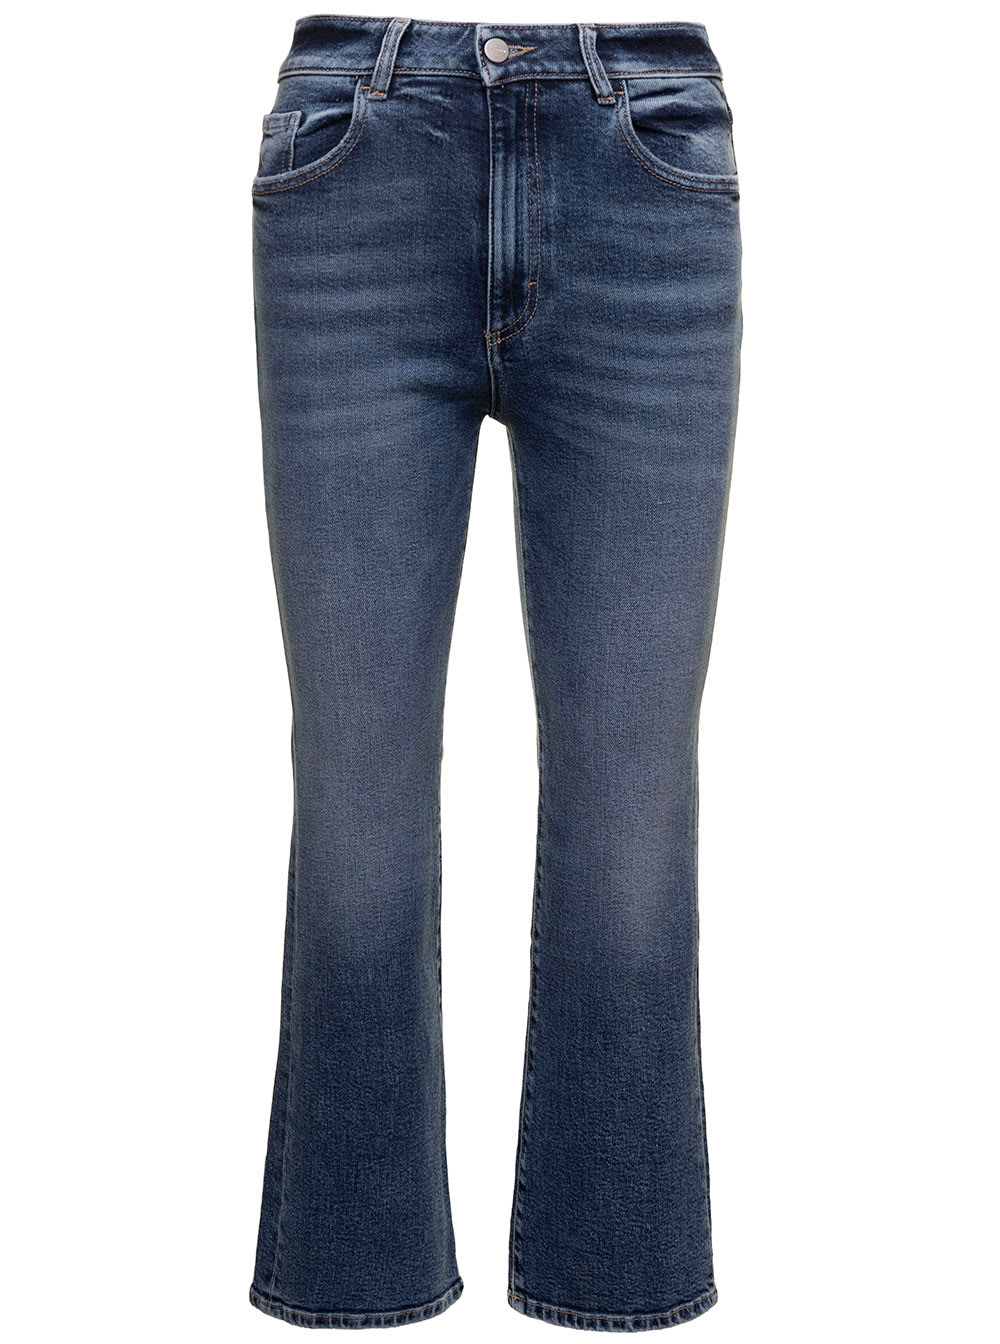 Black High-waisted Mini Flare Jeans In Cotton Blend Denim Woman